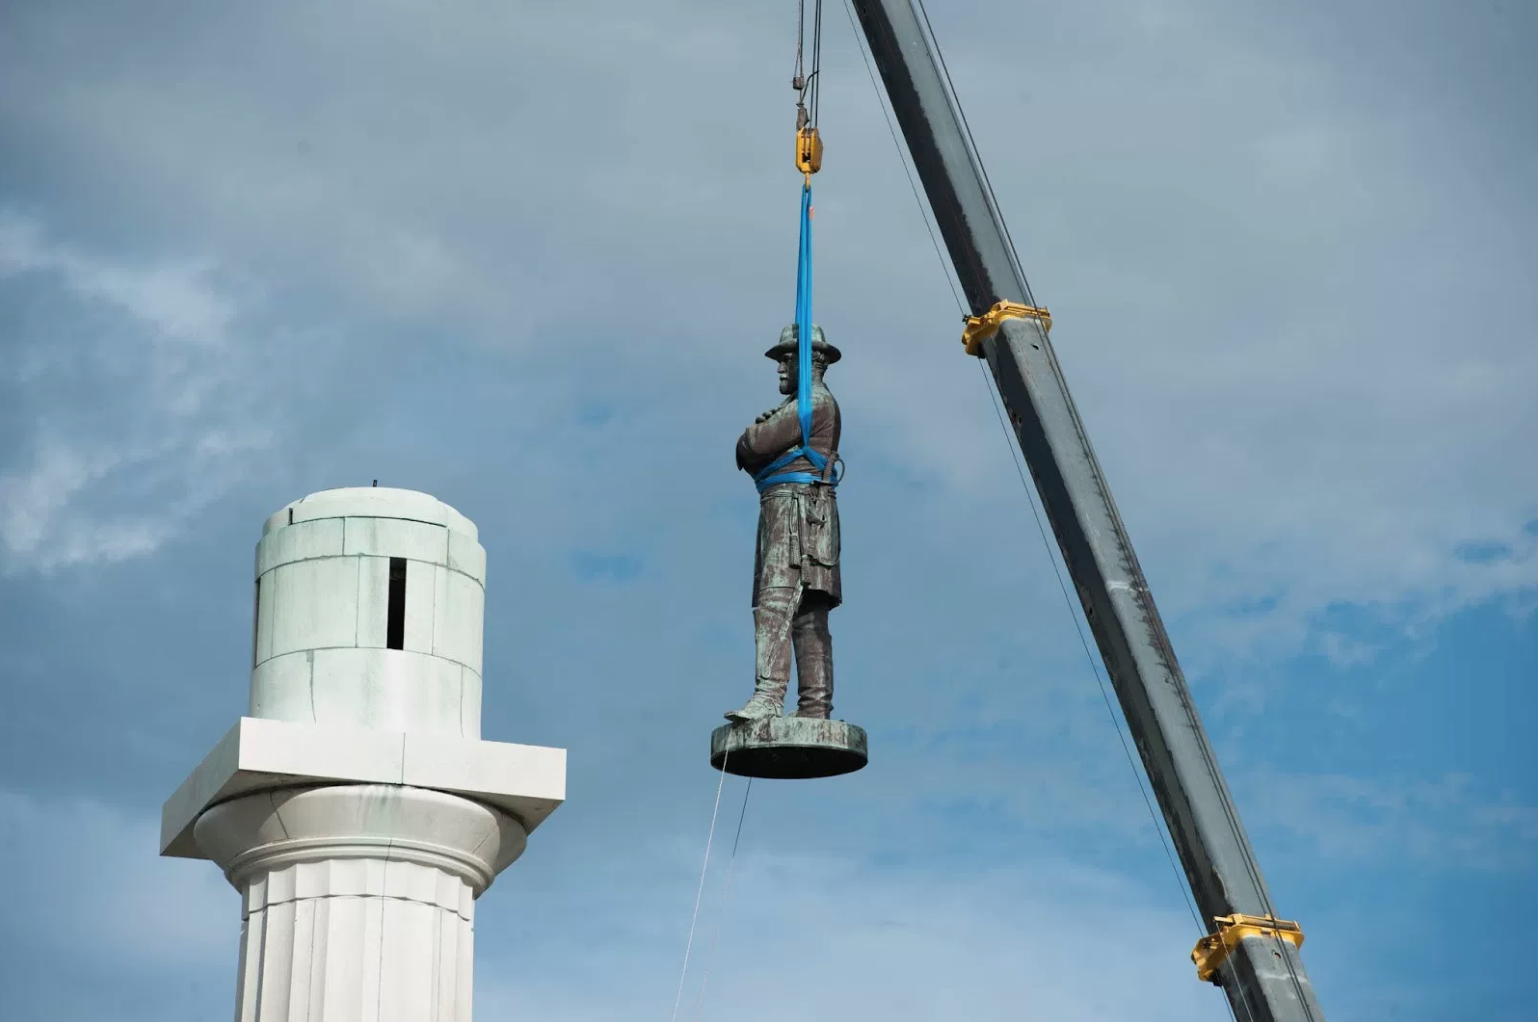 On May 19, 2017, the statue of Robert E. Lee was removed from Lee Circle in New Orleans